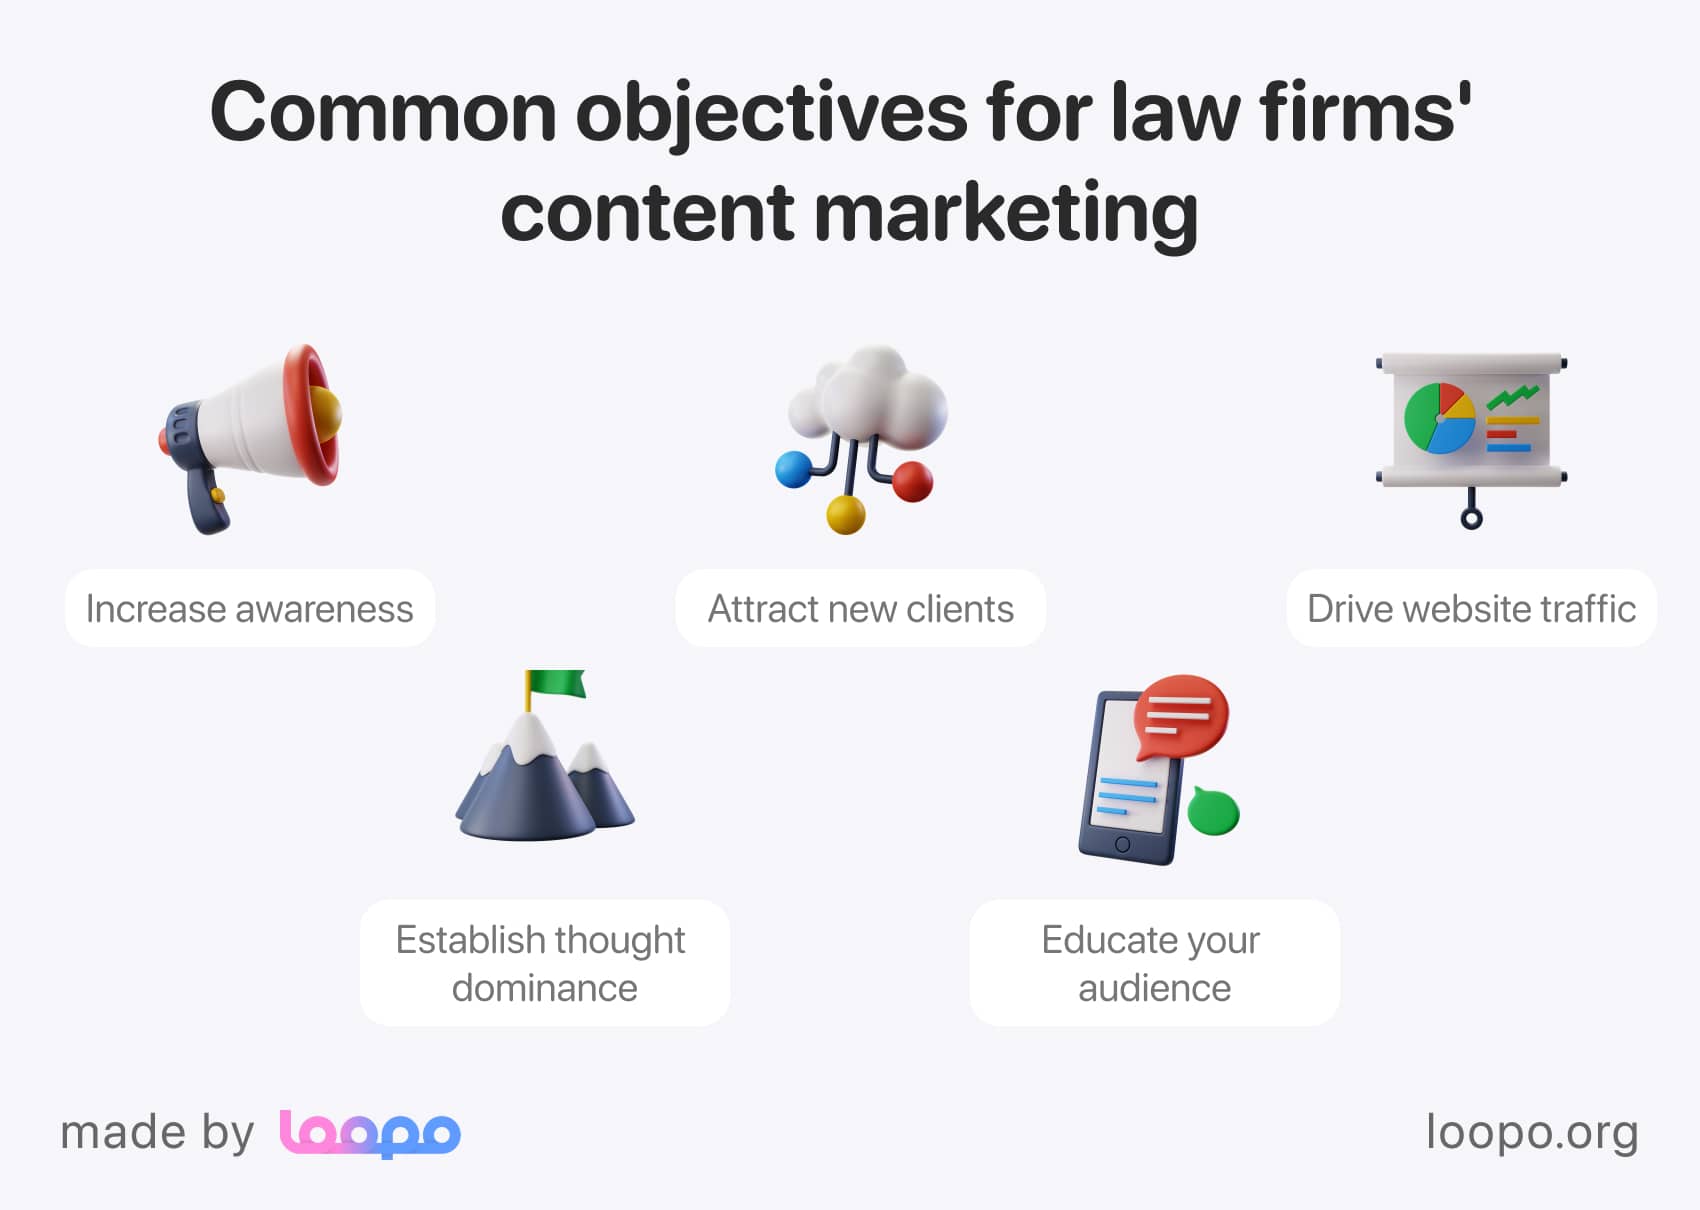 Top objectives for content marketing in law firms